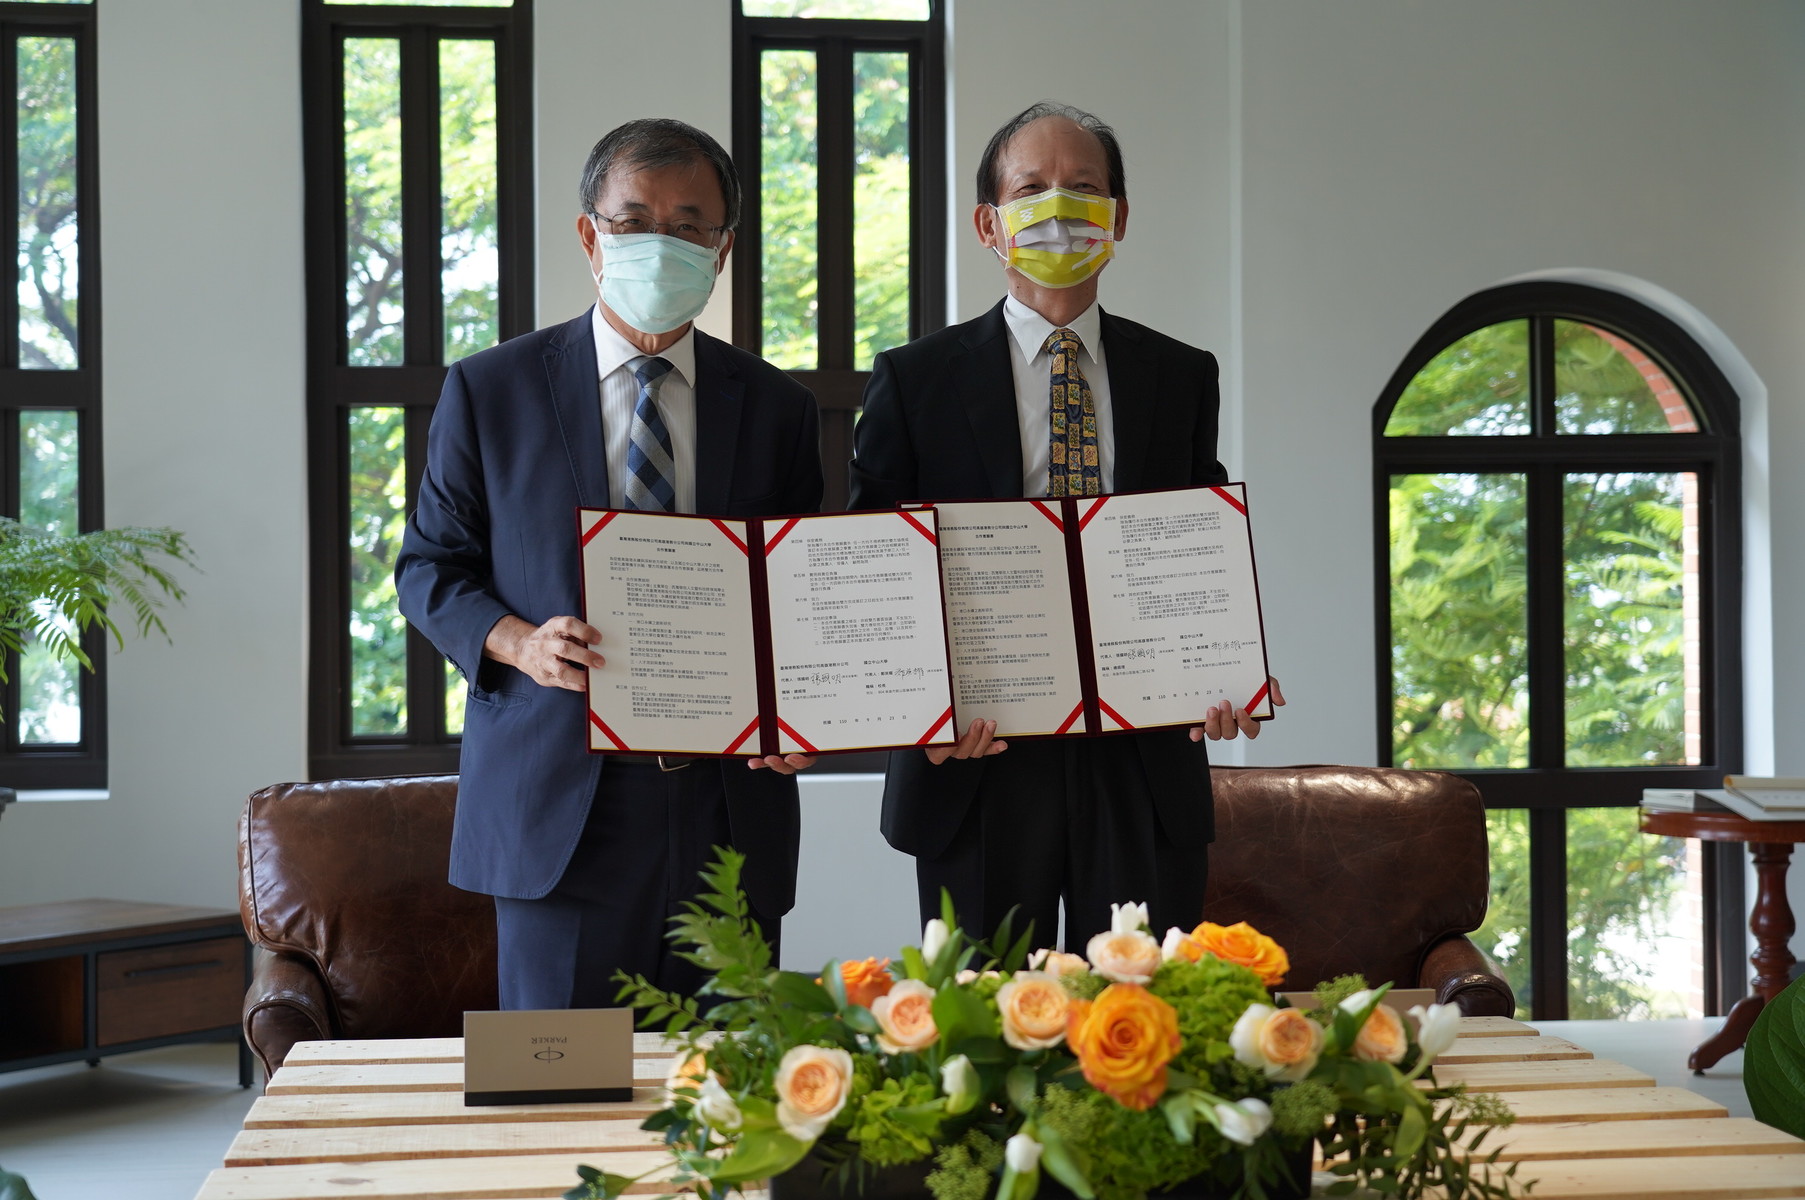 NSYSU President Ying-Yao Cheng and Vice President and CEO of the Port of Kaohsiung Kow-Ming Chang signed a letter of intent on industry-academia cooperation.